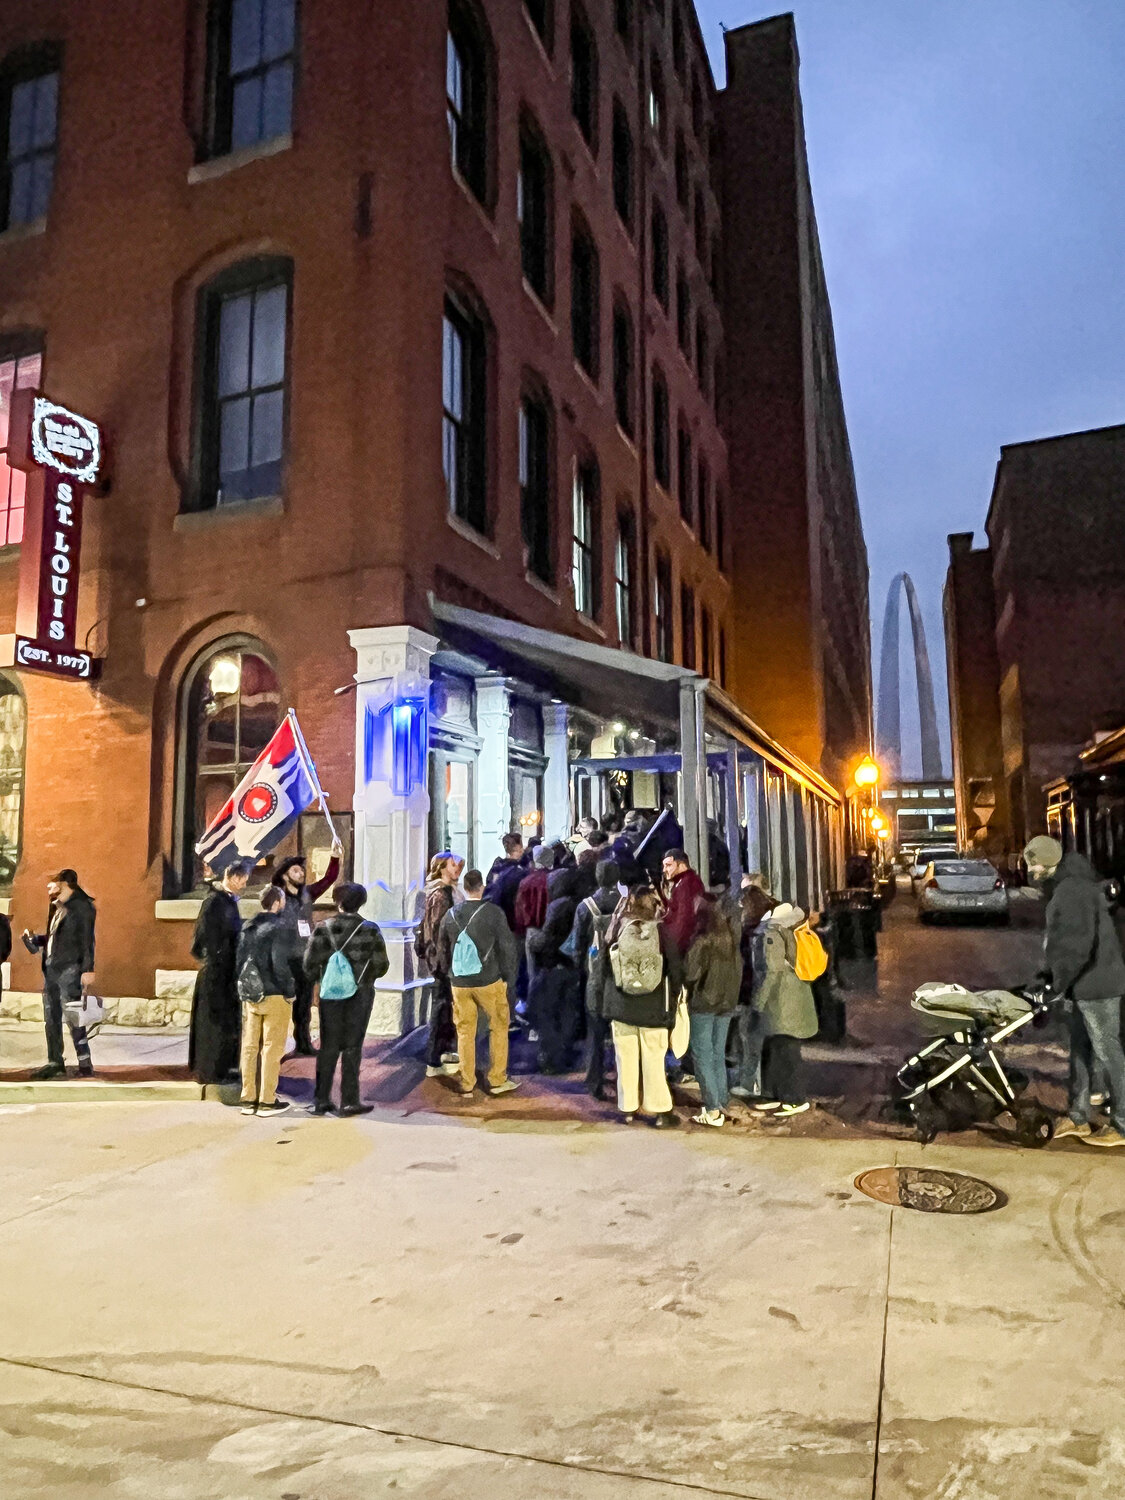 The end of the group arrives at a restaurant at Laclede’s Landing, with the Gateway Arch visible through the alley.